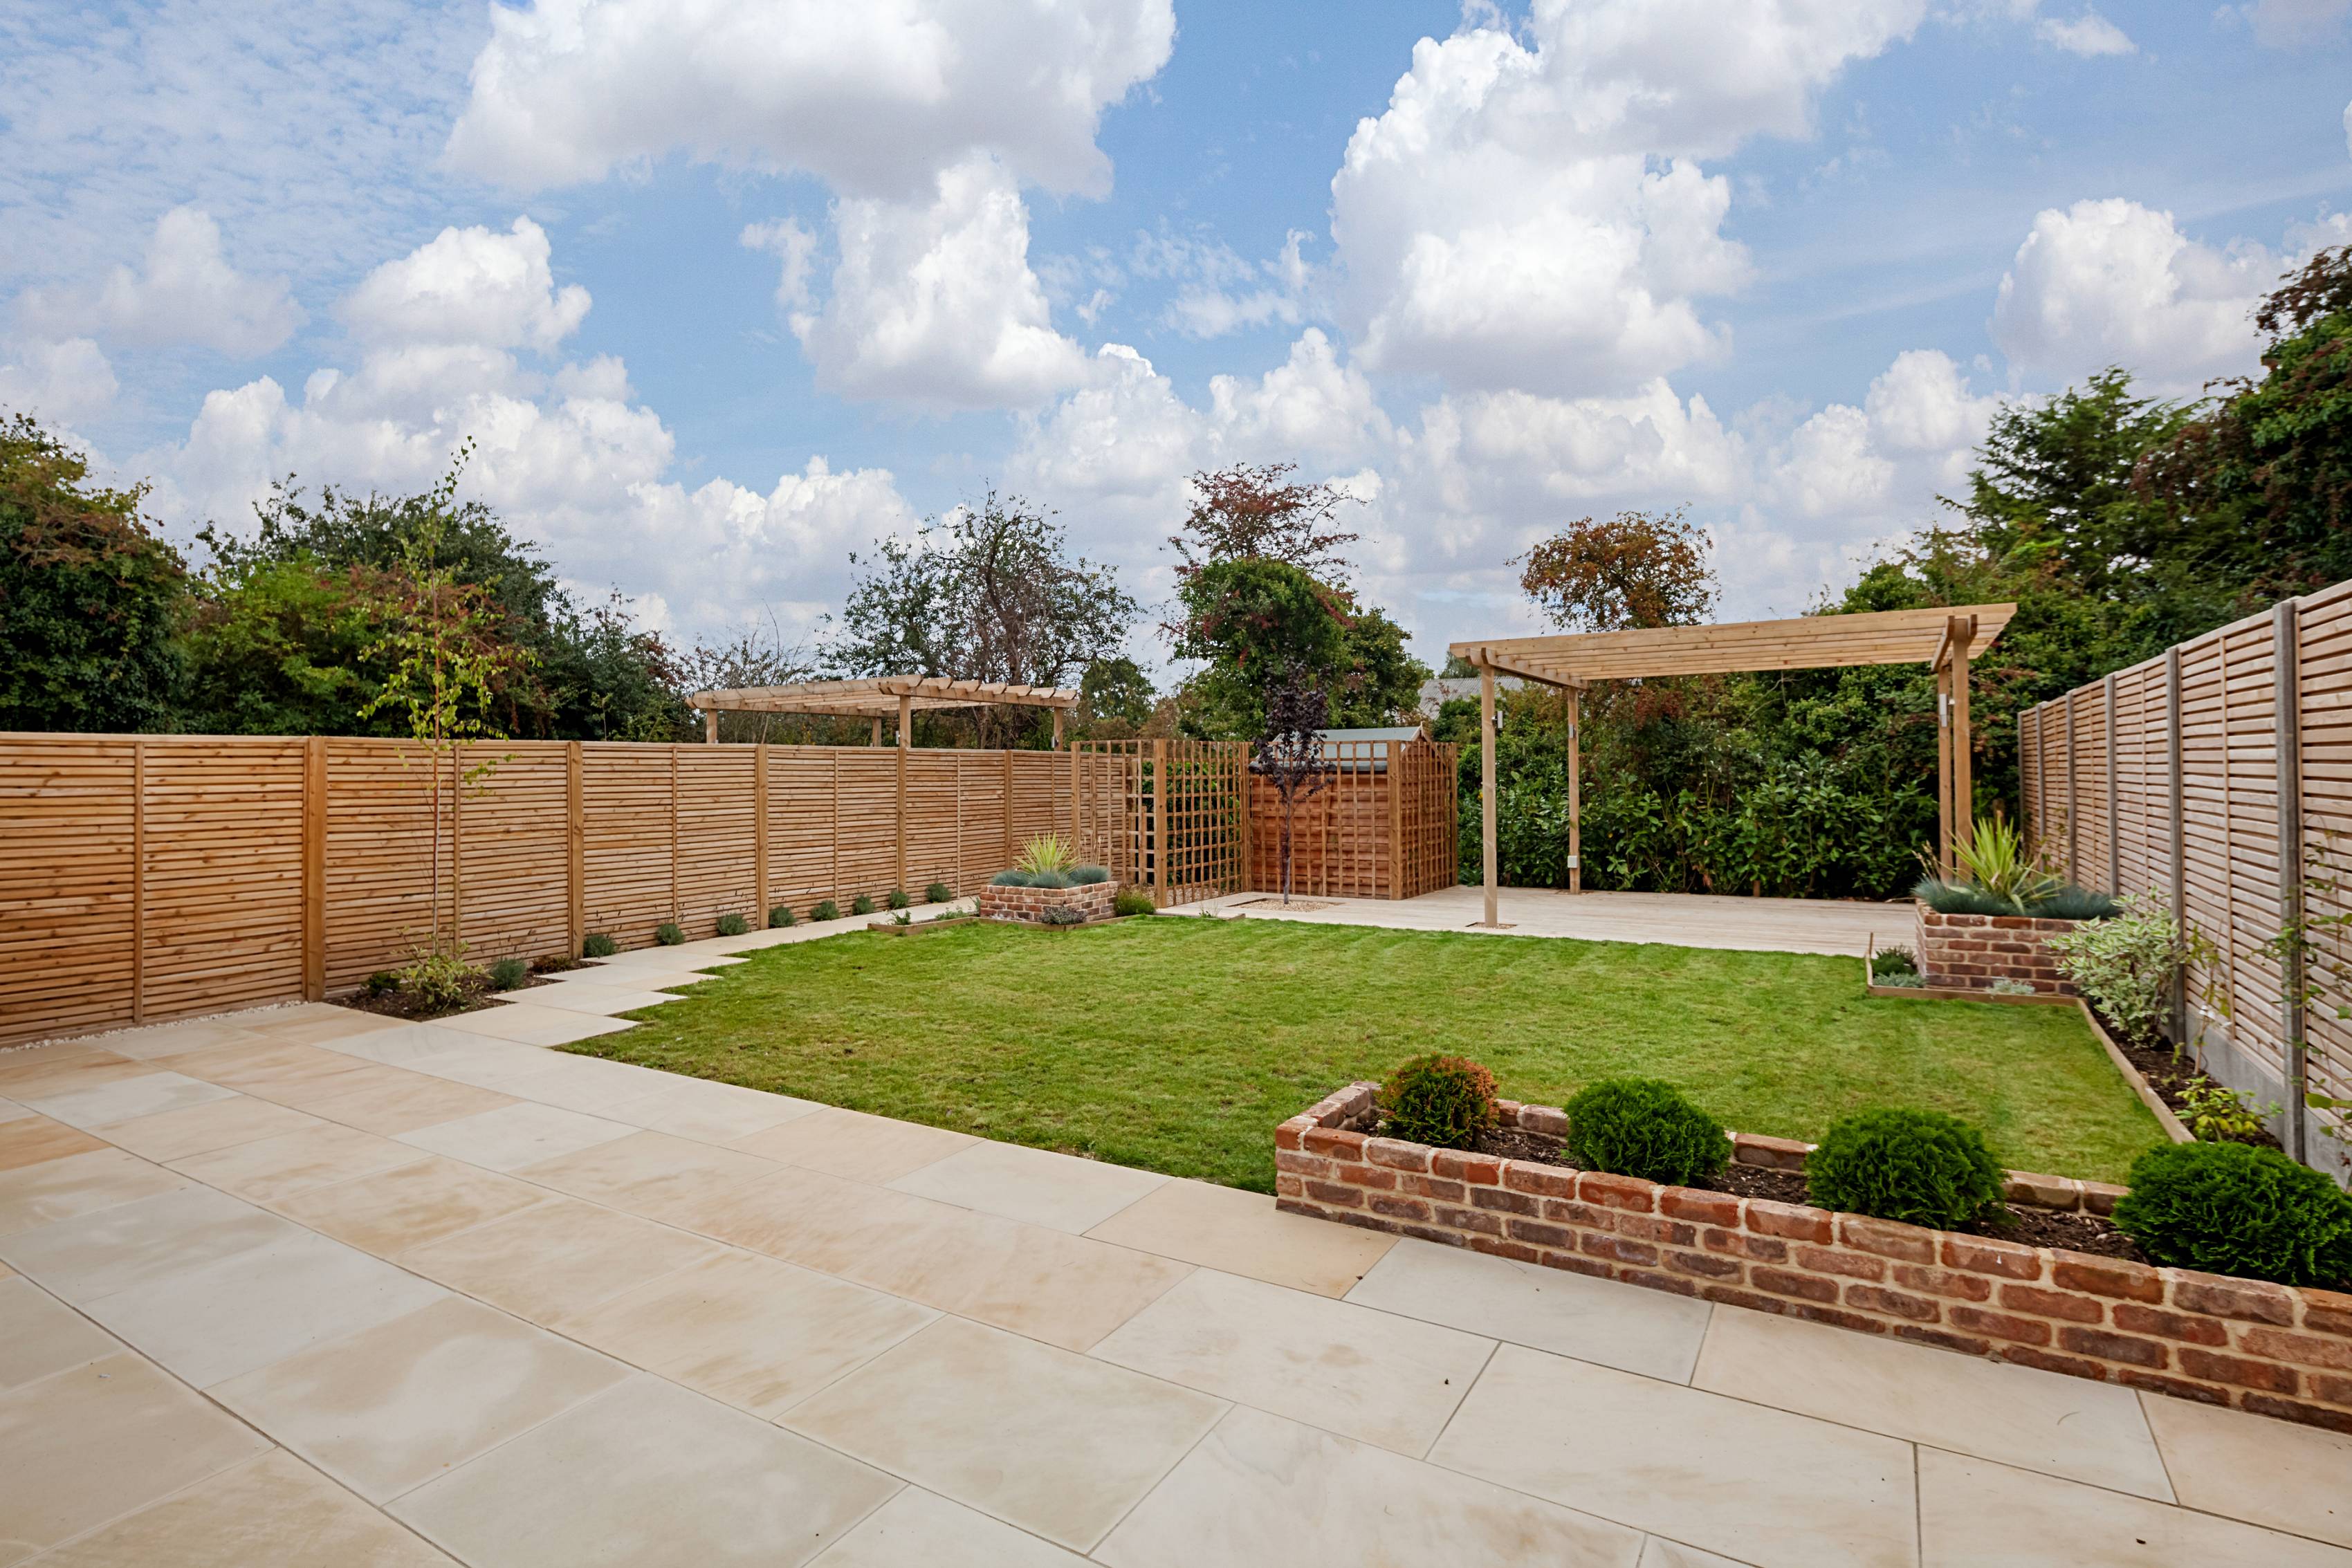 a property with a large patio garden